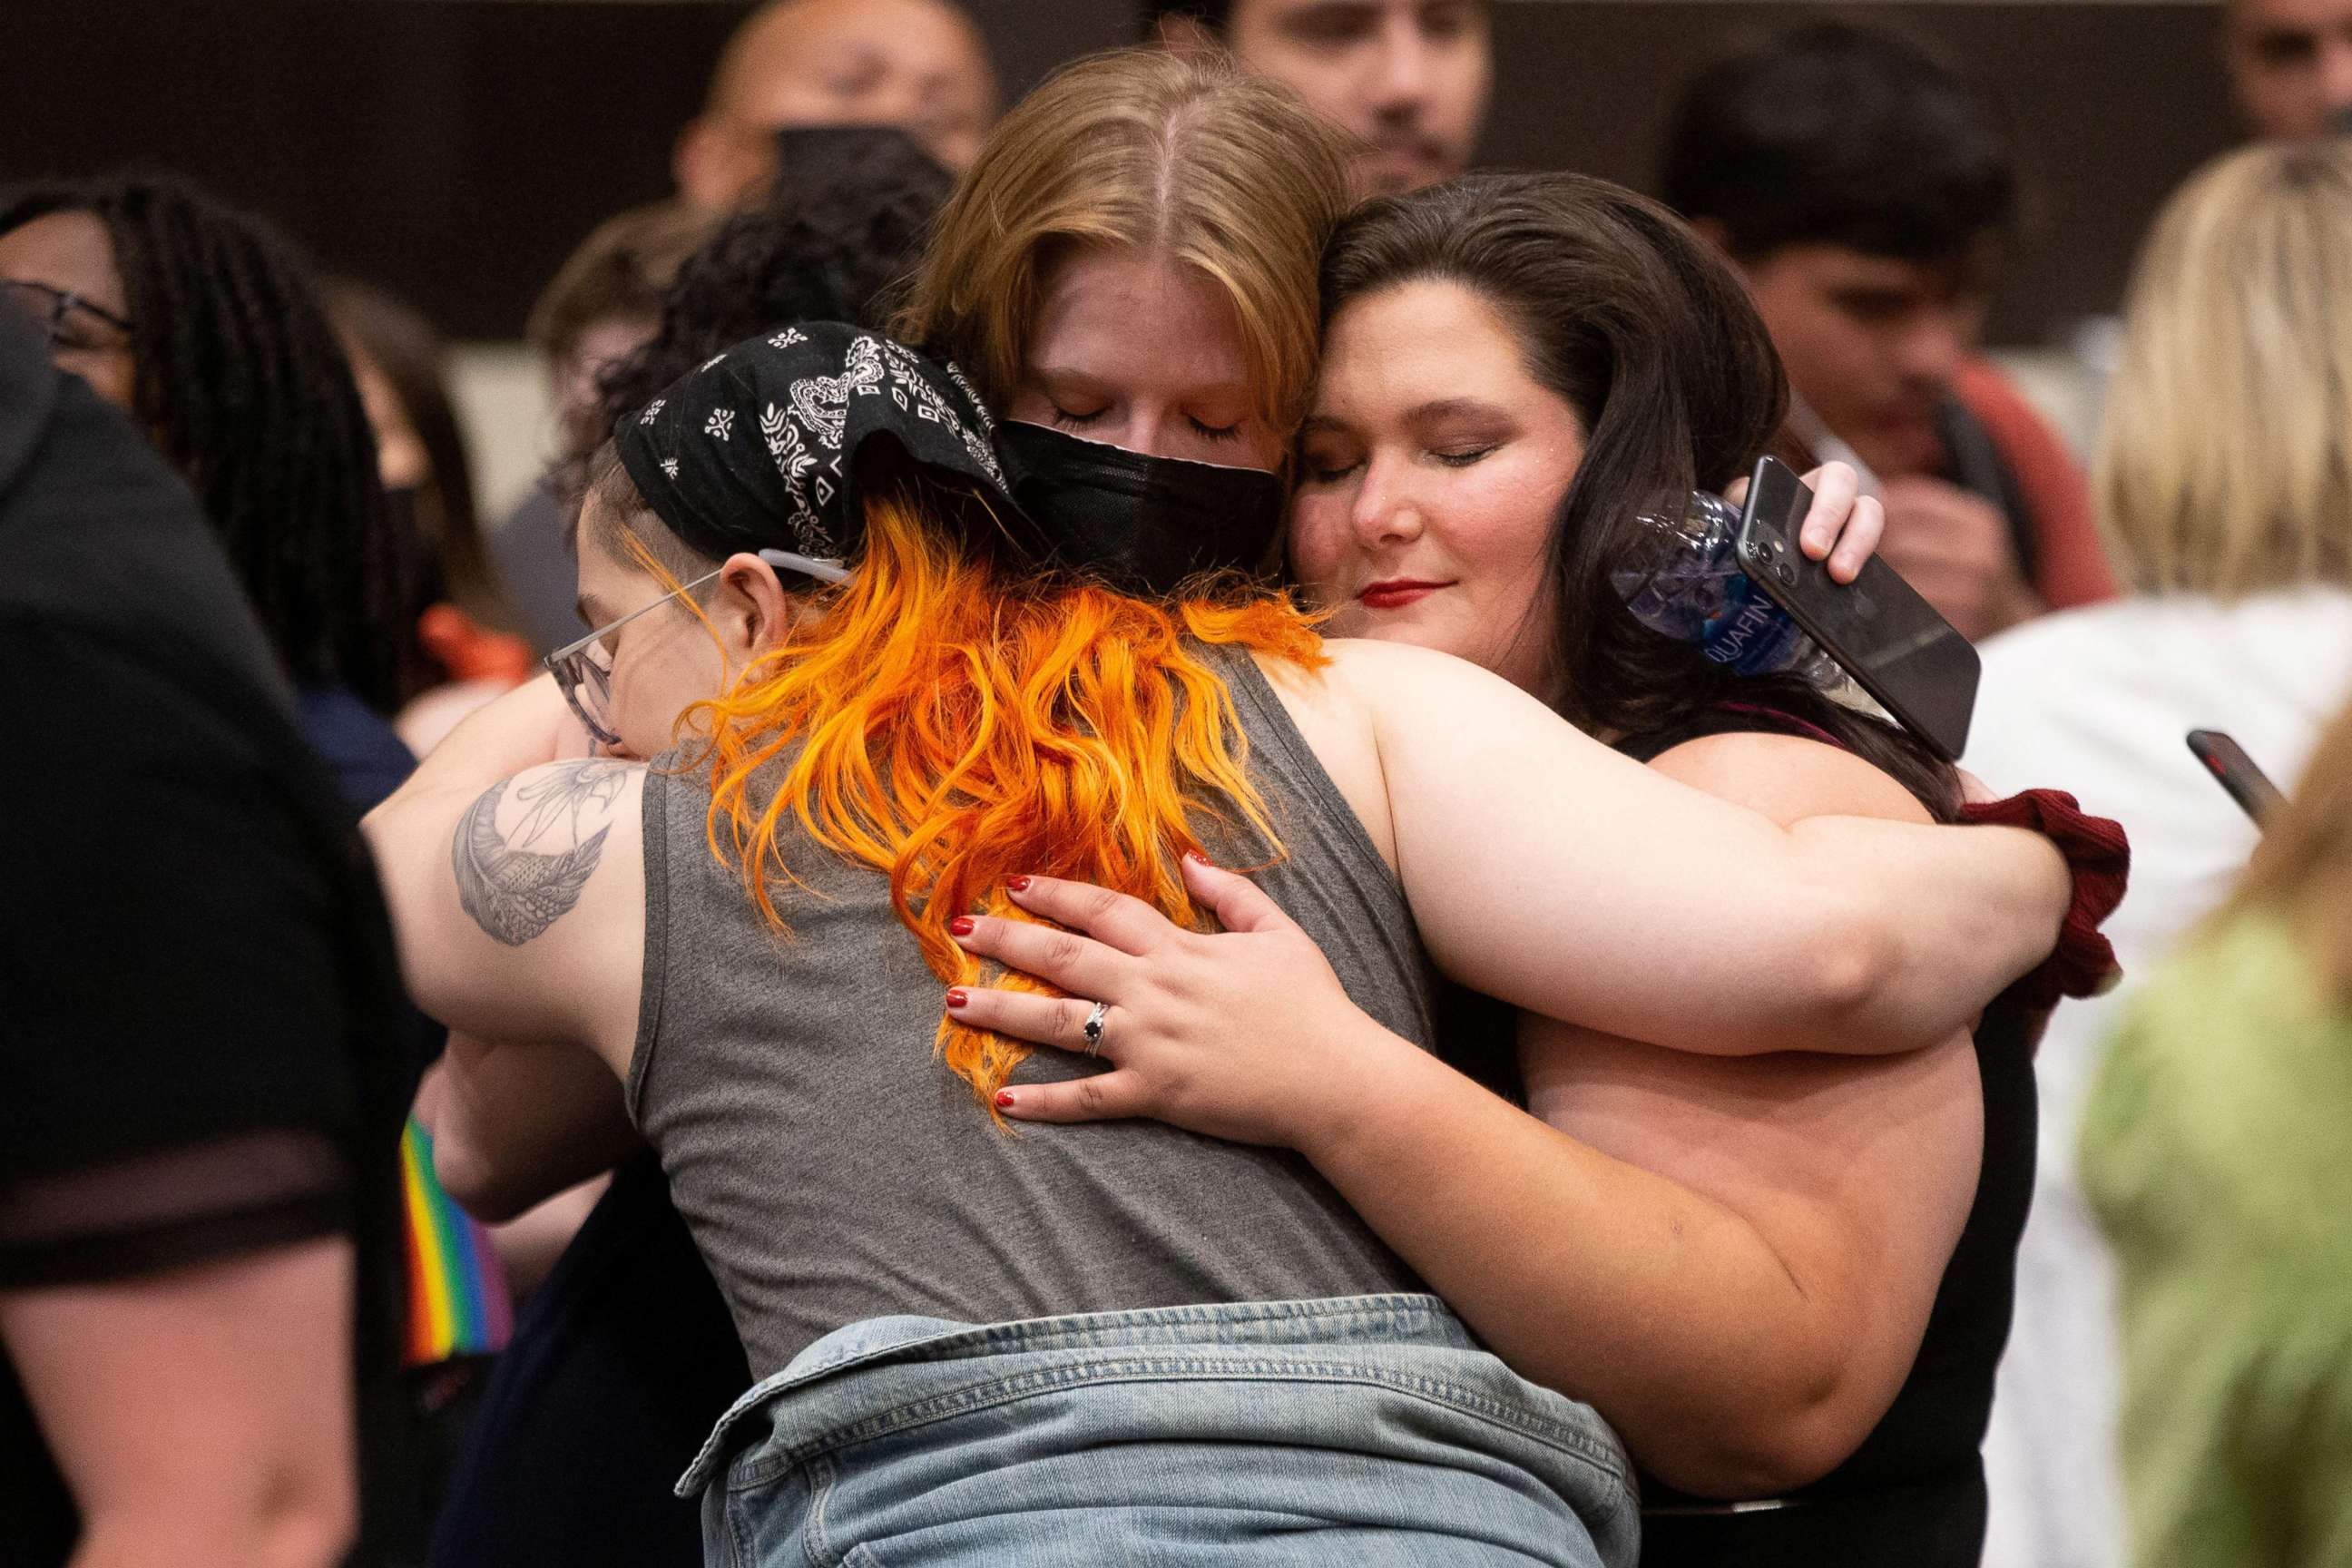 PHOTO: Abortion rights supporters react to the news that voters had rejected a state constitutional amendment that would have banned abortion during the Kansans for Constitutional Freedom election watch party in Overland Park, Kansas, Aug. 2, 2022.